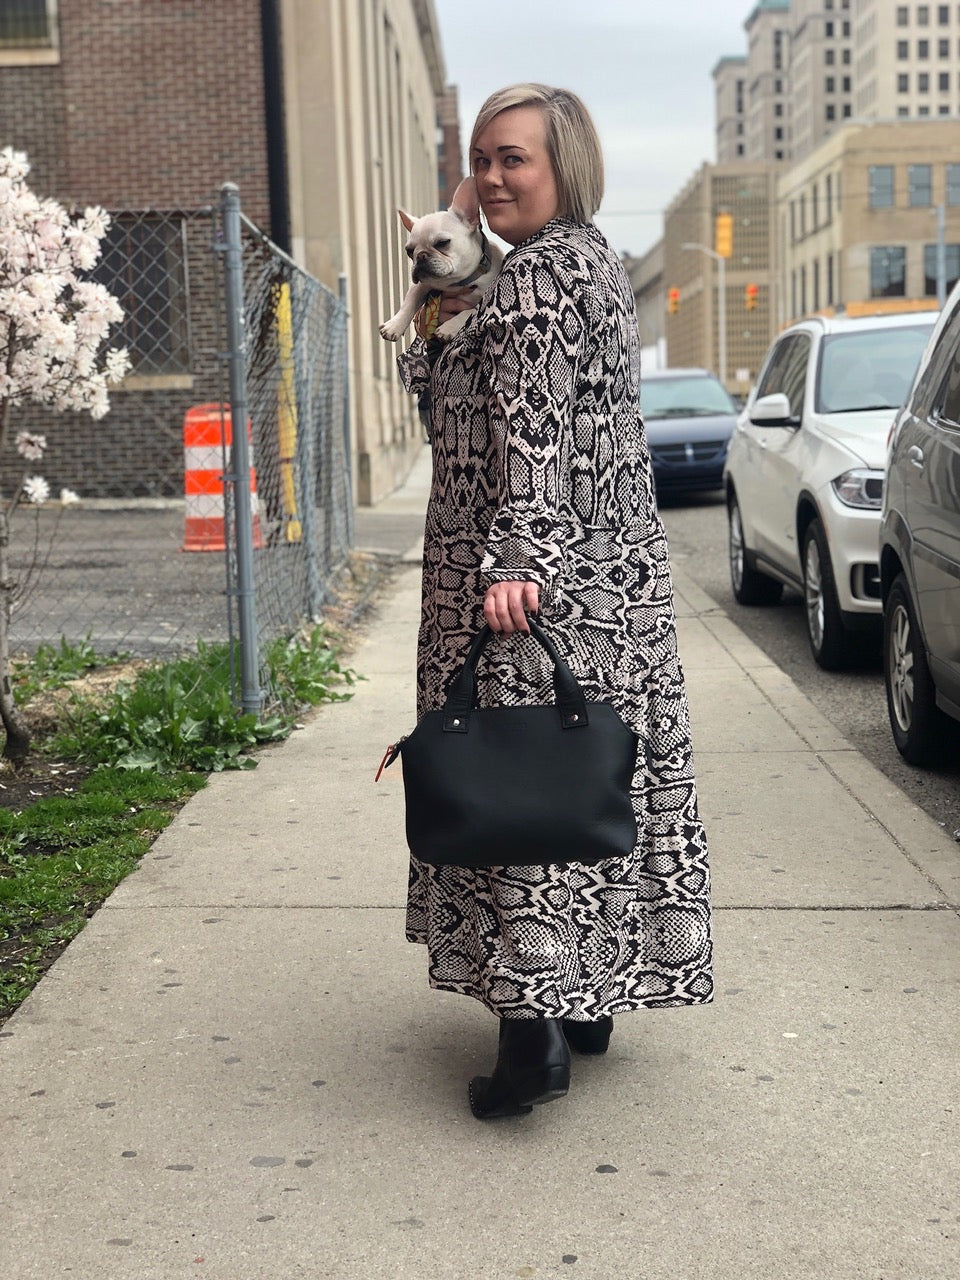 Pingree's Beaubien bag in onyx on a walk in Detroit, modeled by a woman and her dog. All leather made from repurposed from the automotive industry.